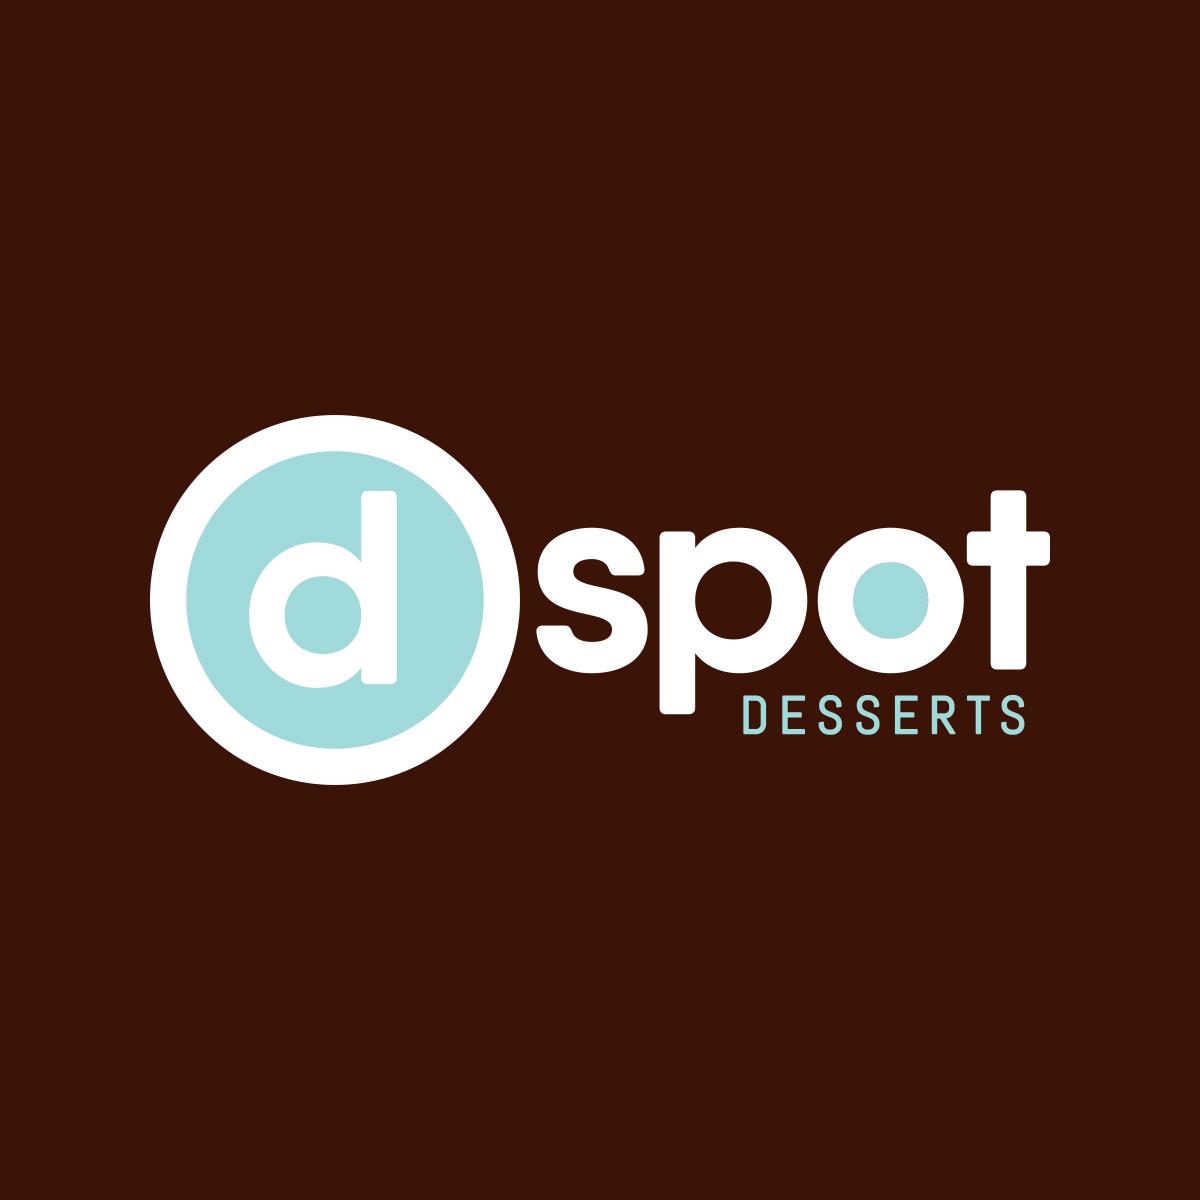 "Logo of D Spot Desserts featuring a stylized 'd' in a light blue circle with the brand name in lowercase on a brown background